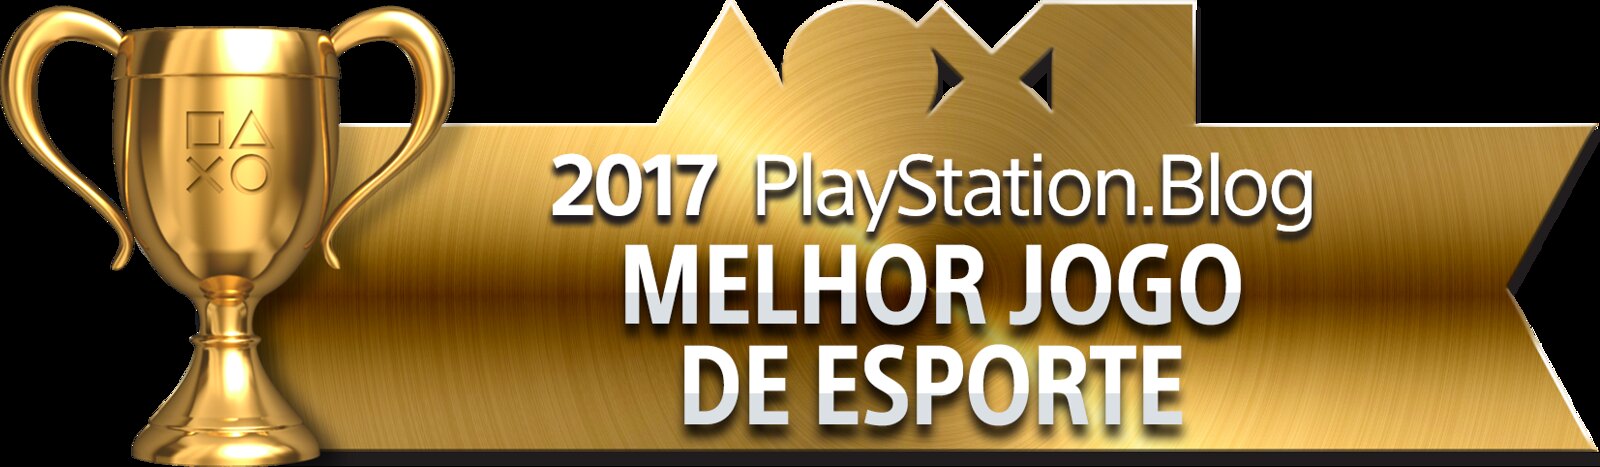 PlayStation Blog Game of the Year 2017 - Best Sports Game (Gold)